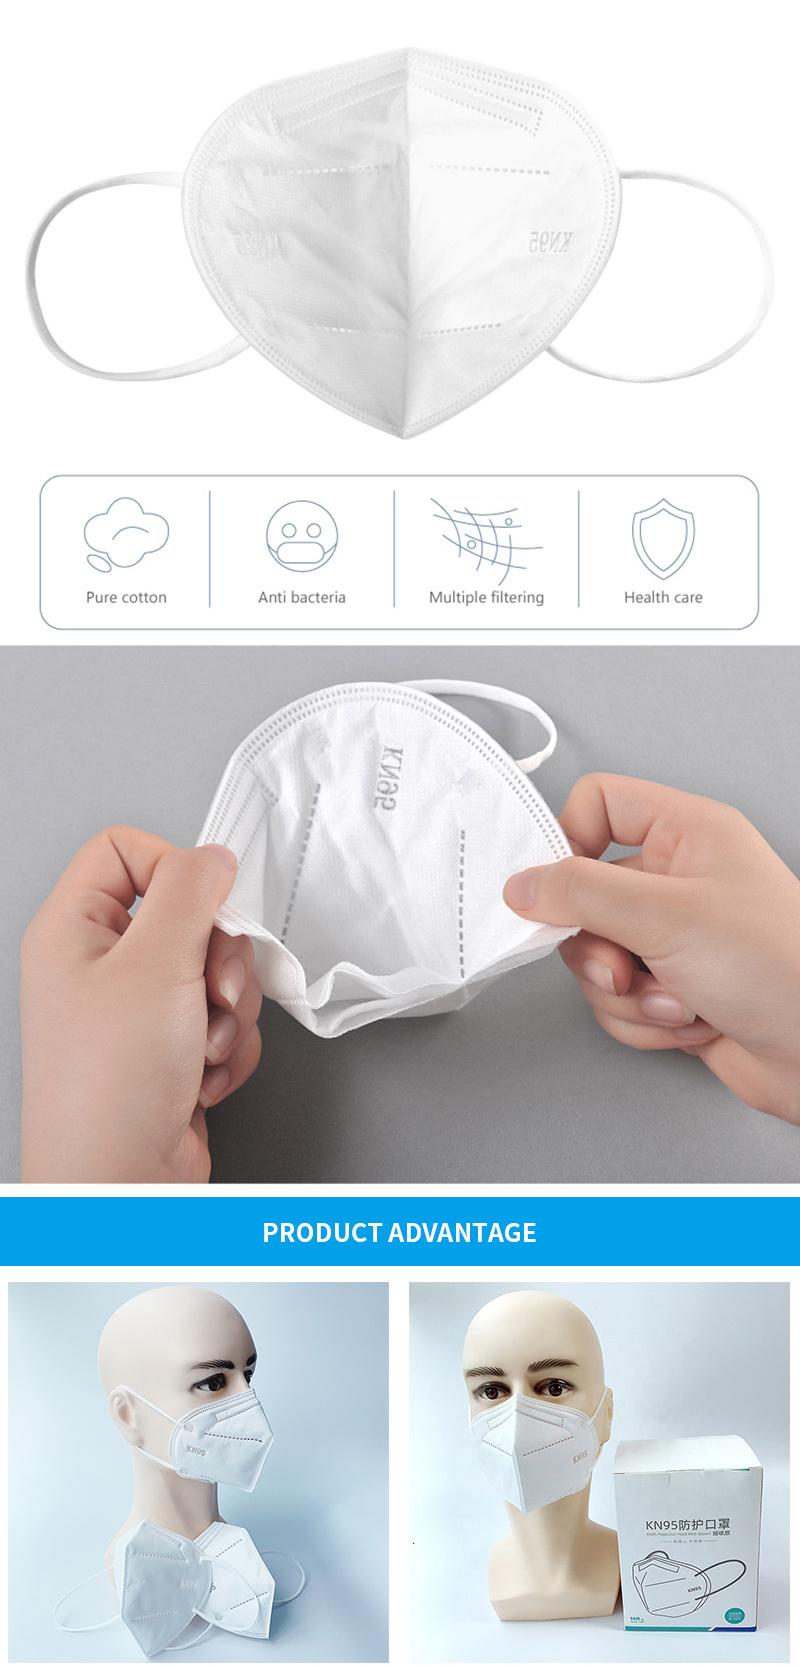 KN95 Face Mask 20 PCS, 5 Layers Cup Dust Mask Against Pm2.5 From Fire Smoke, Dust, for Men, Women, Essential Workers (White)